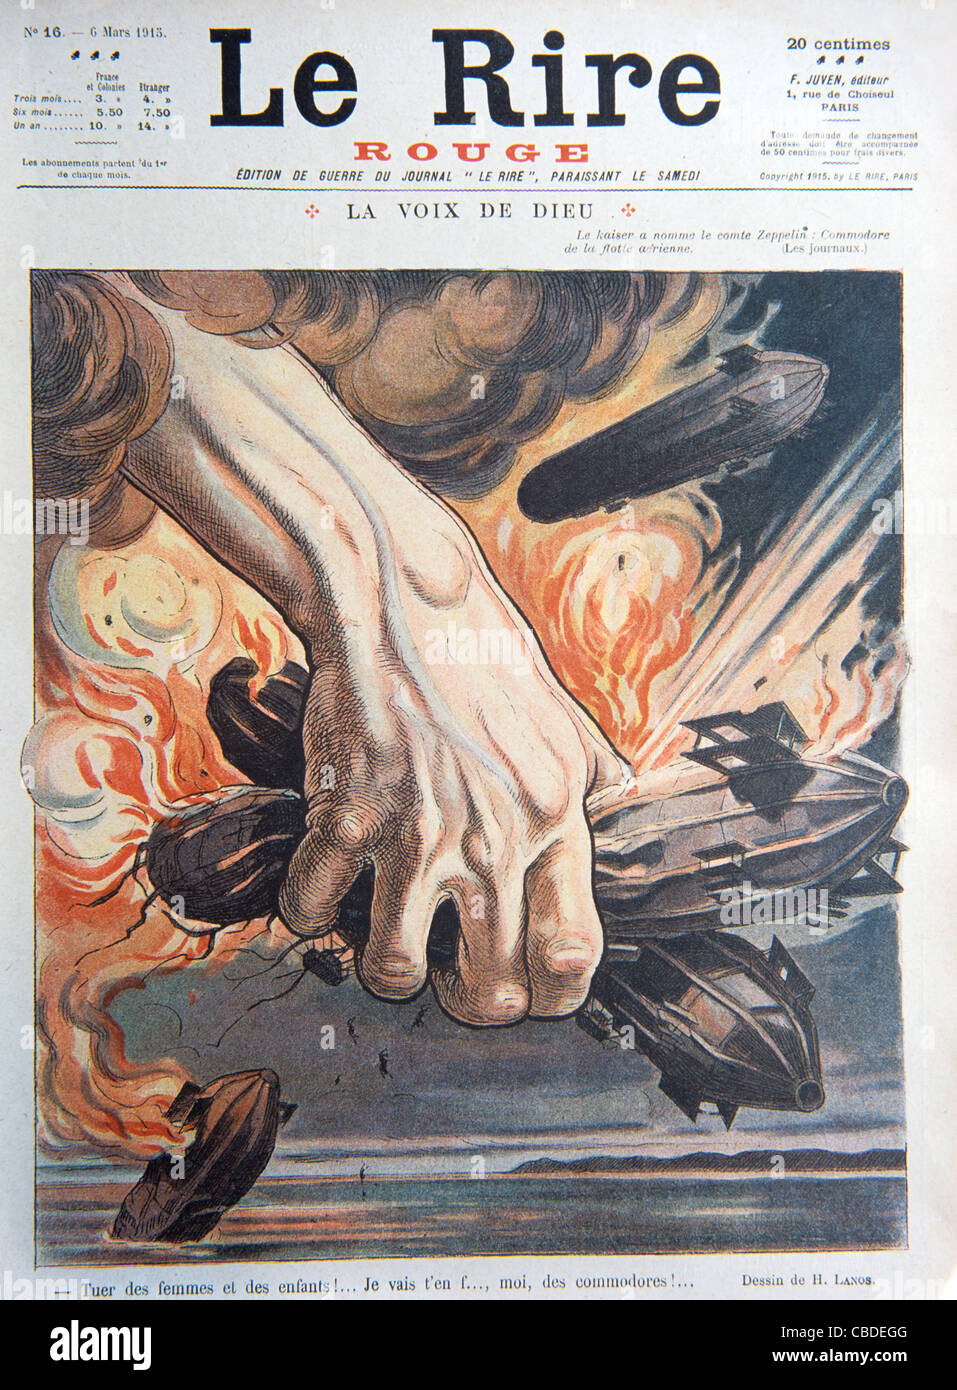 German Zeppelin Bombers Used in Air Raids in First World War & Destroyed by French Army. Cover of War Ed of French Satirical Magazine 'Le Rire', March 1915. Vintage Illustration Stock Photo